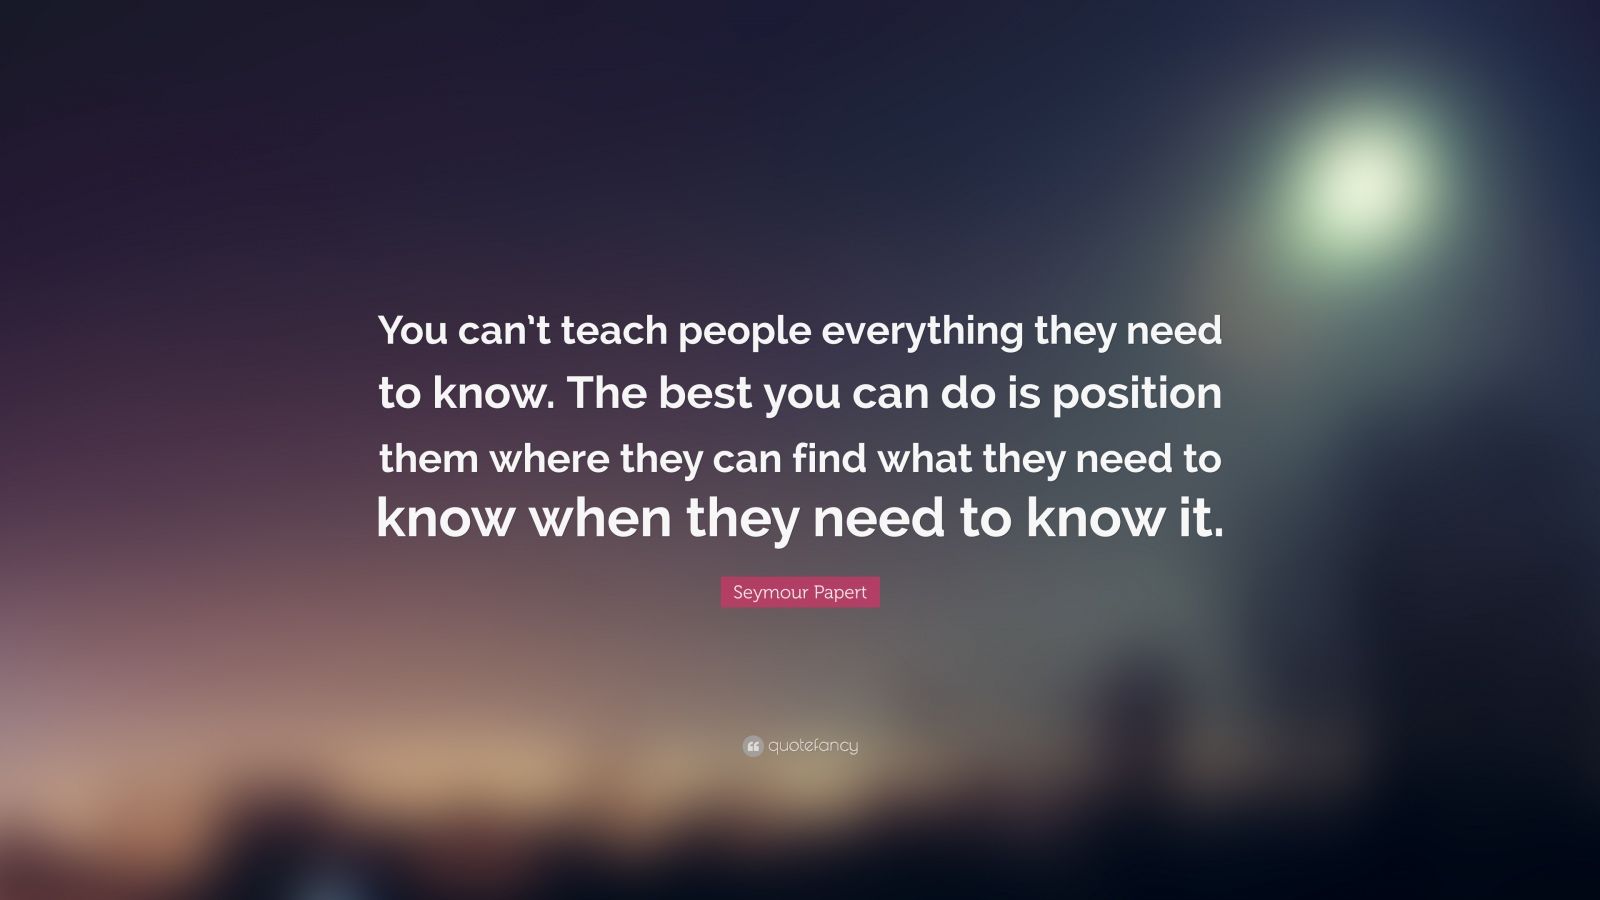 need they know teach everything seymour papert quotes them where find quote when uchtdorf dieter willful transgression wallpapers quotefancy position